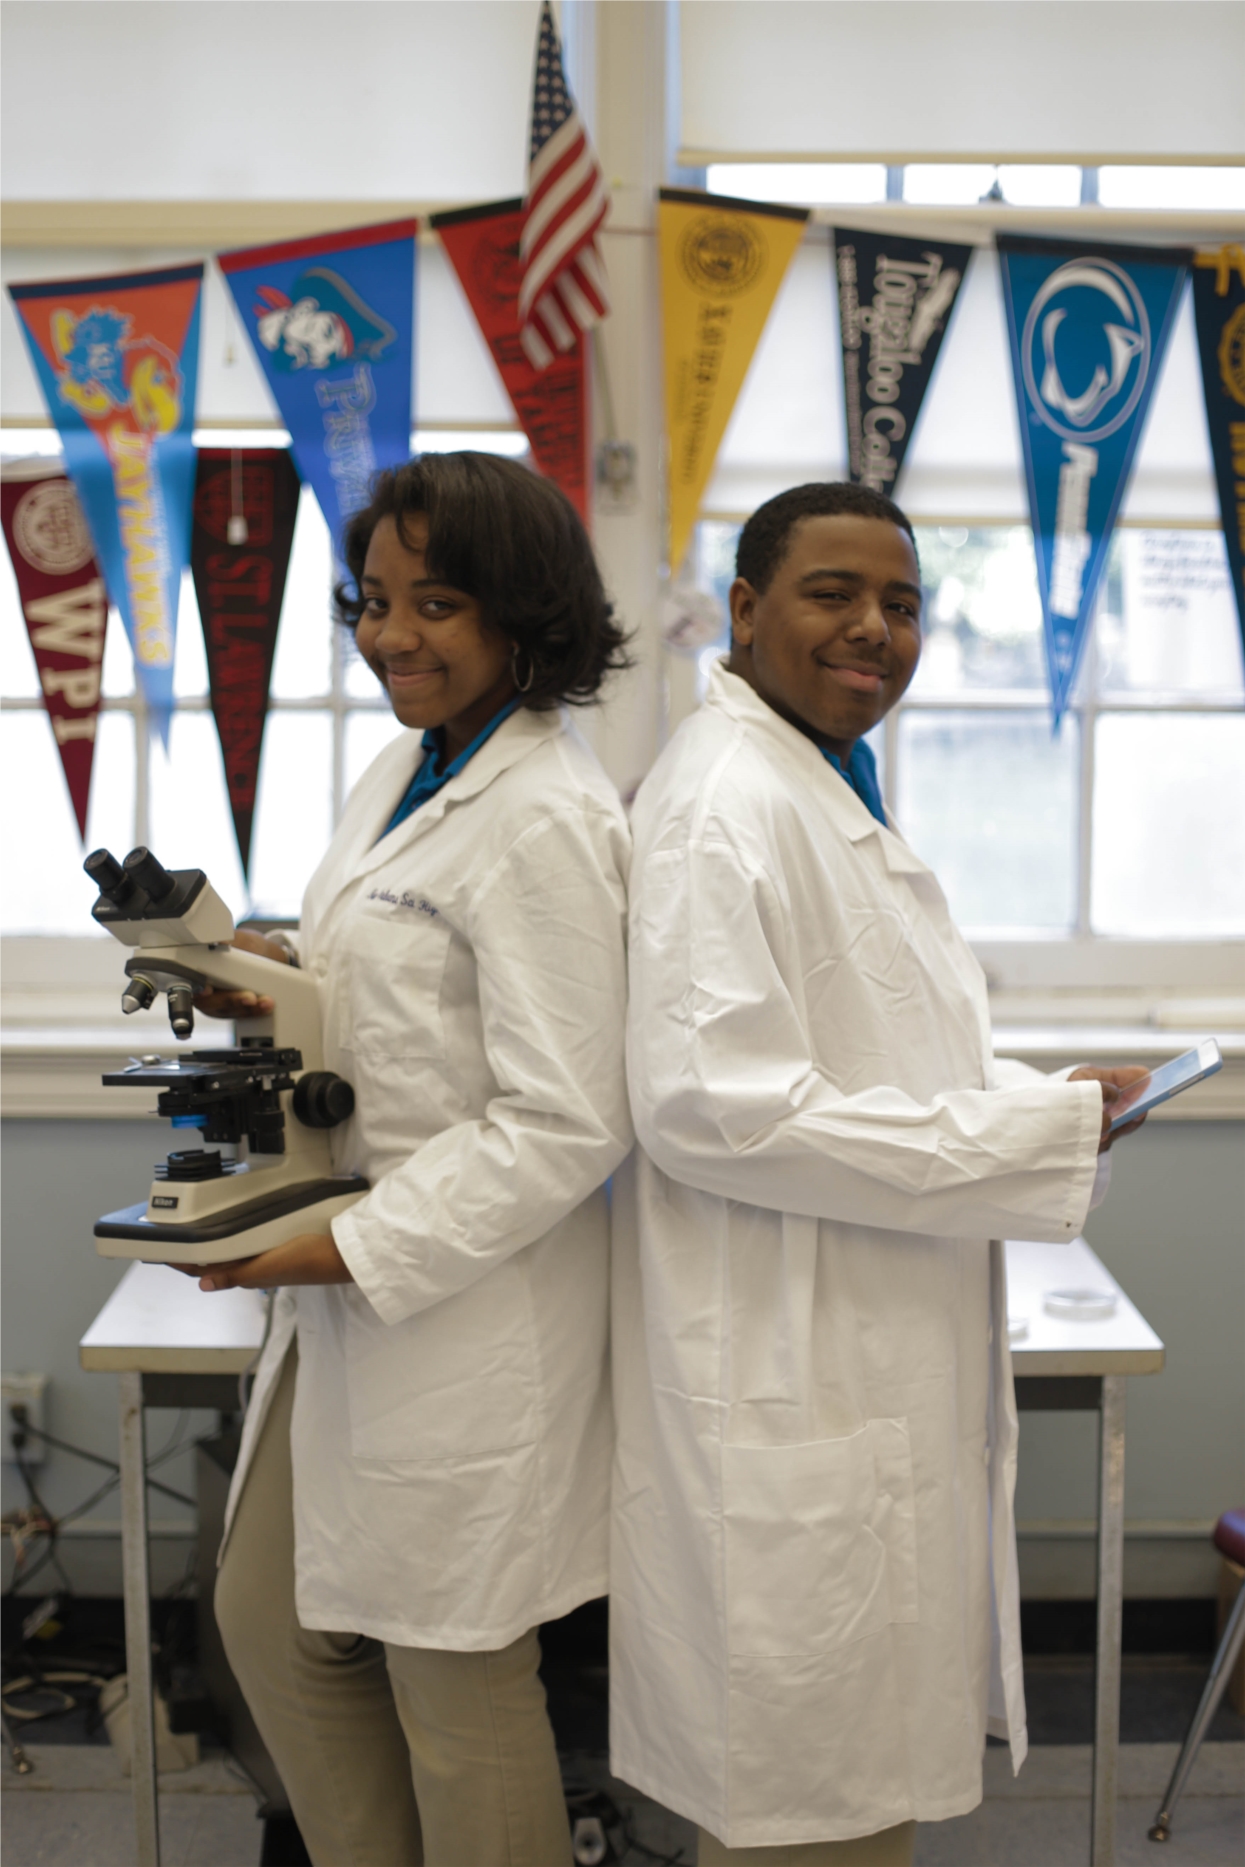 Alana Collins & Lionel Williams have had multiple STEM career opportunities through Sci High summer internships.